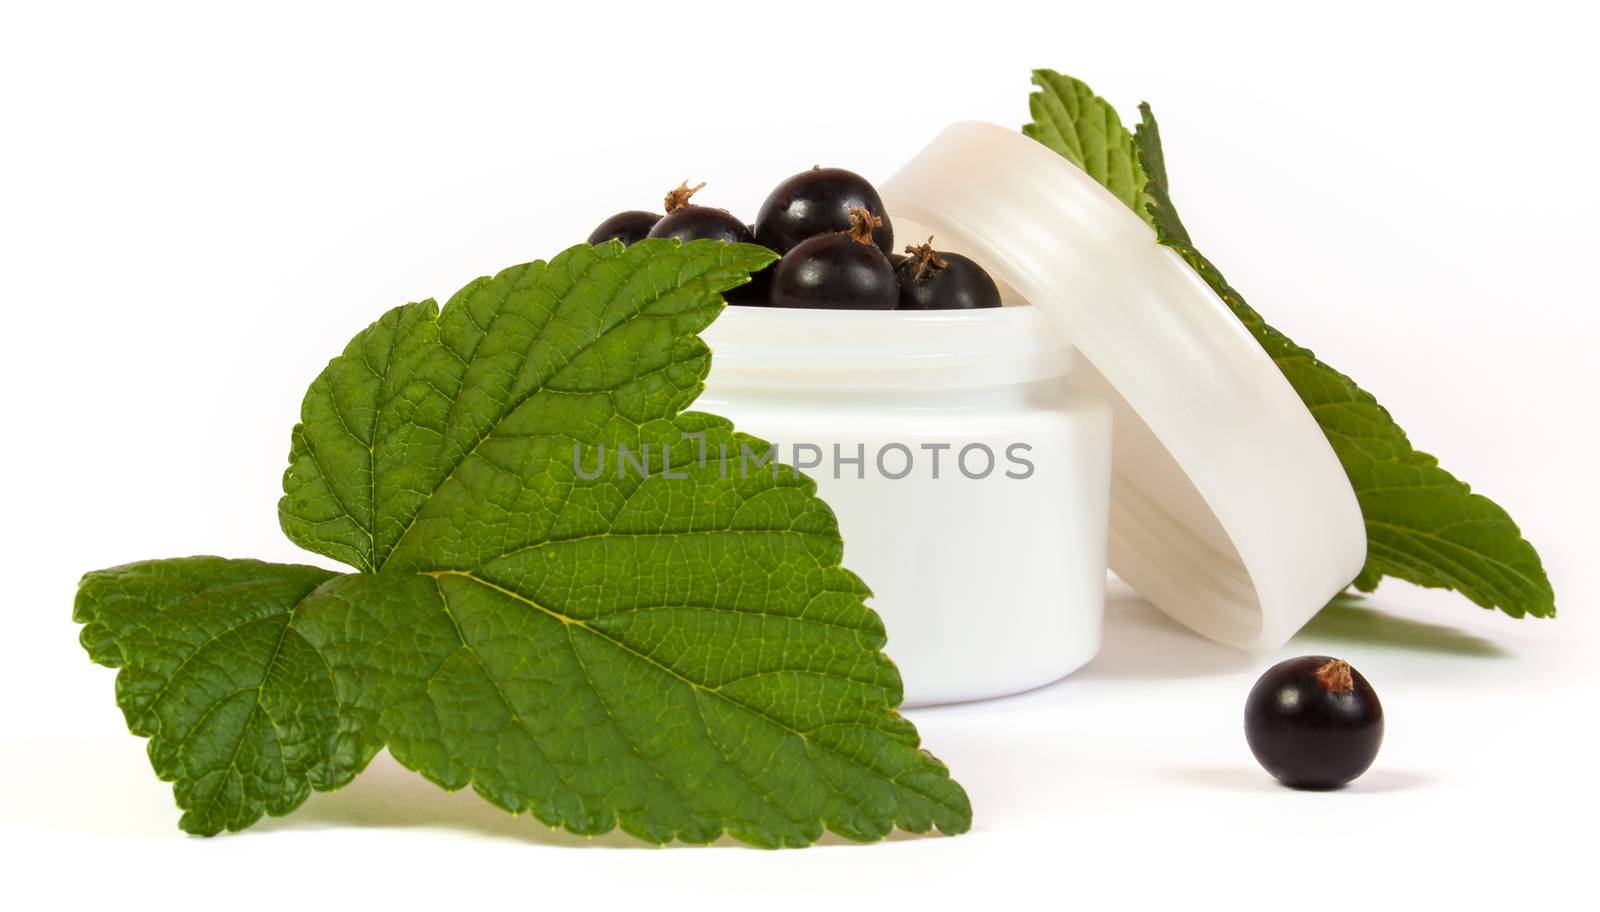 black currants in a jar of makeup with green leaves